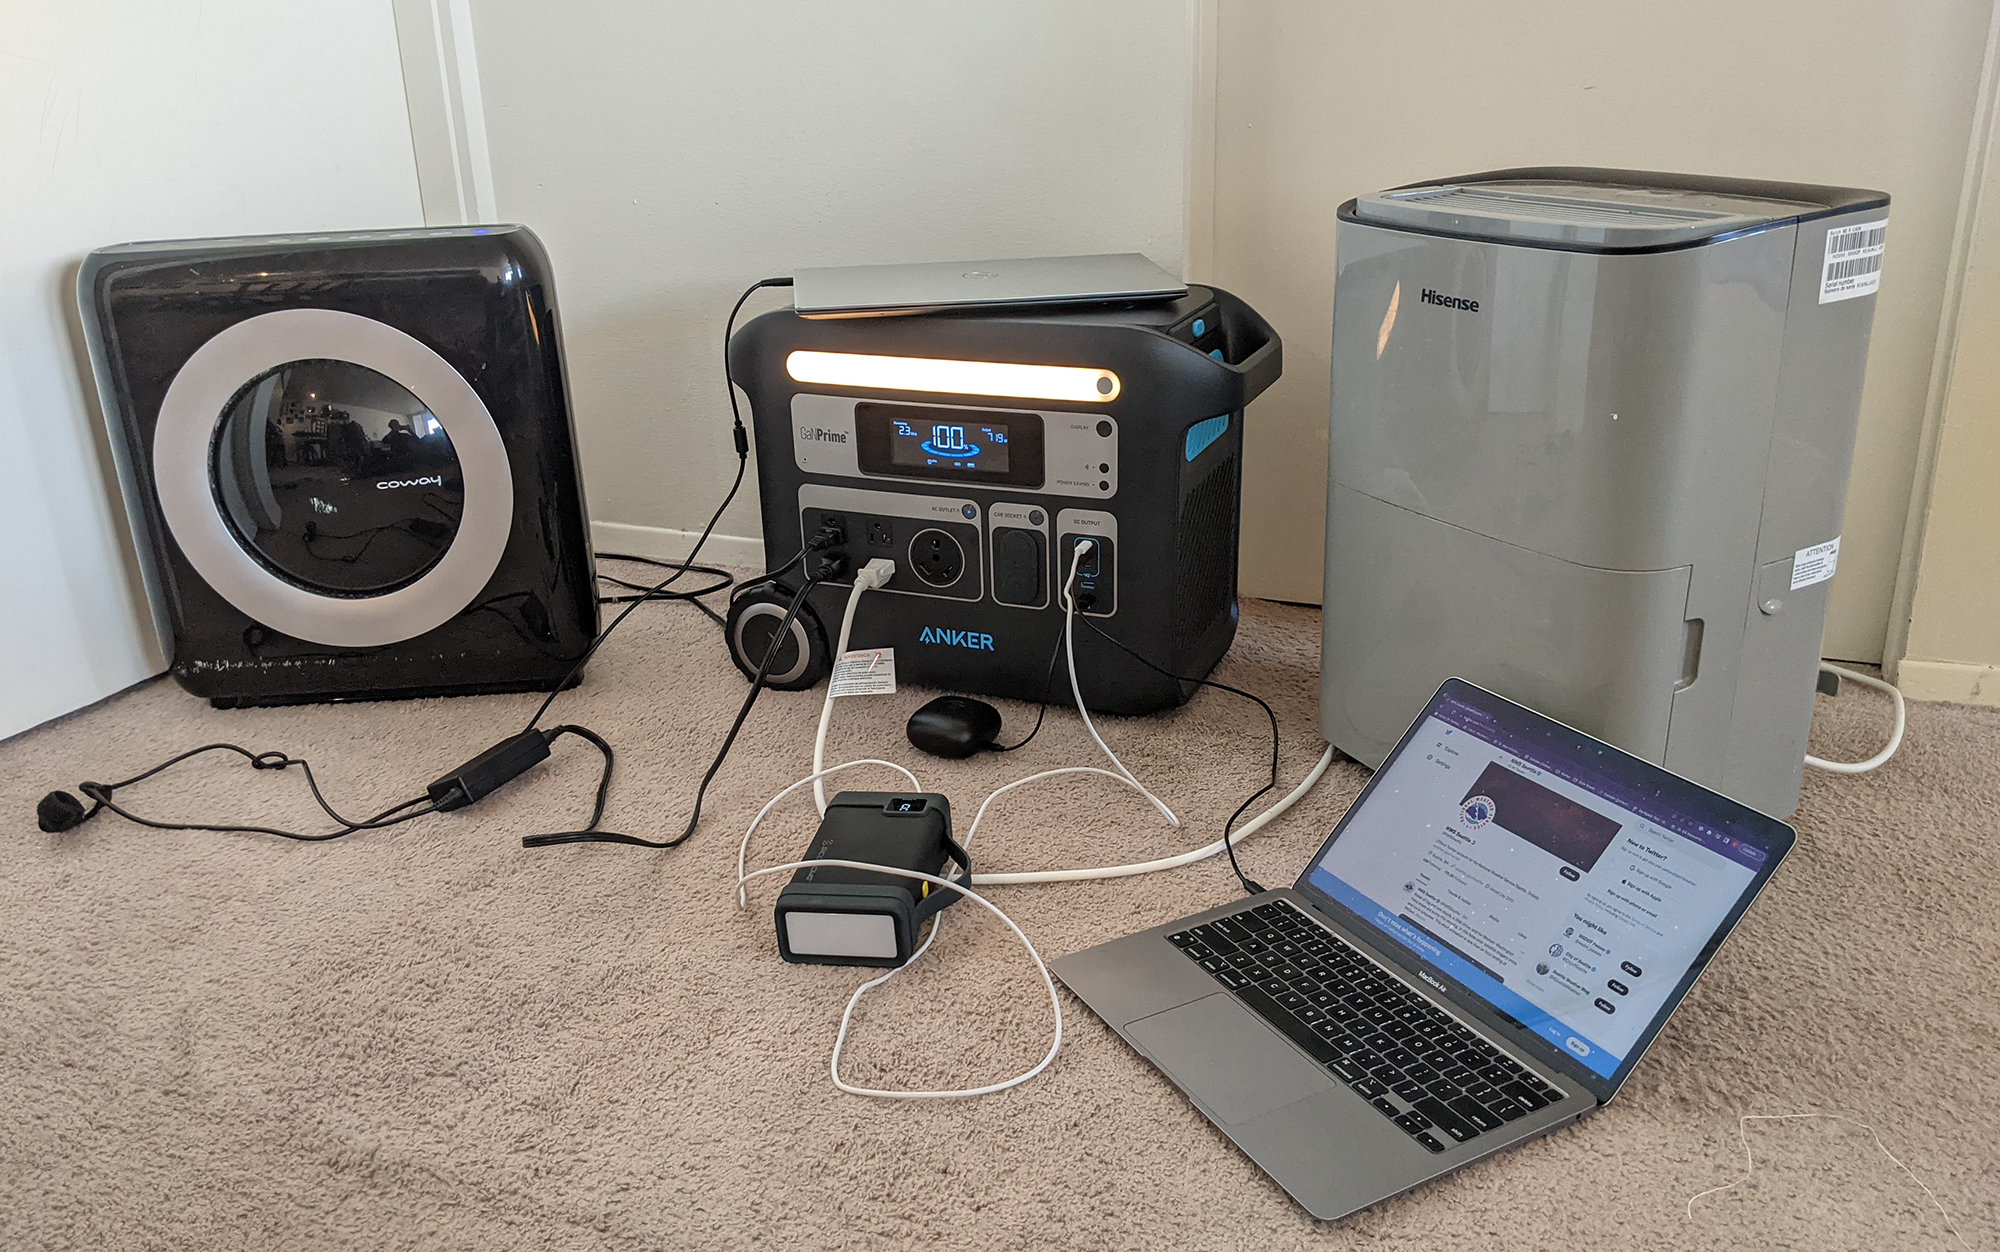 Trying to make a dent in the Anker 767âs output capacity with a dehumidifier, air purifier, two laptops, a battery pack, a pair of headphones, and turning the light on the station up and down using the Anker app. 